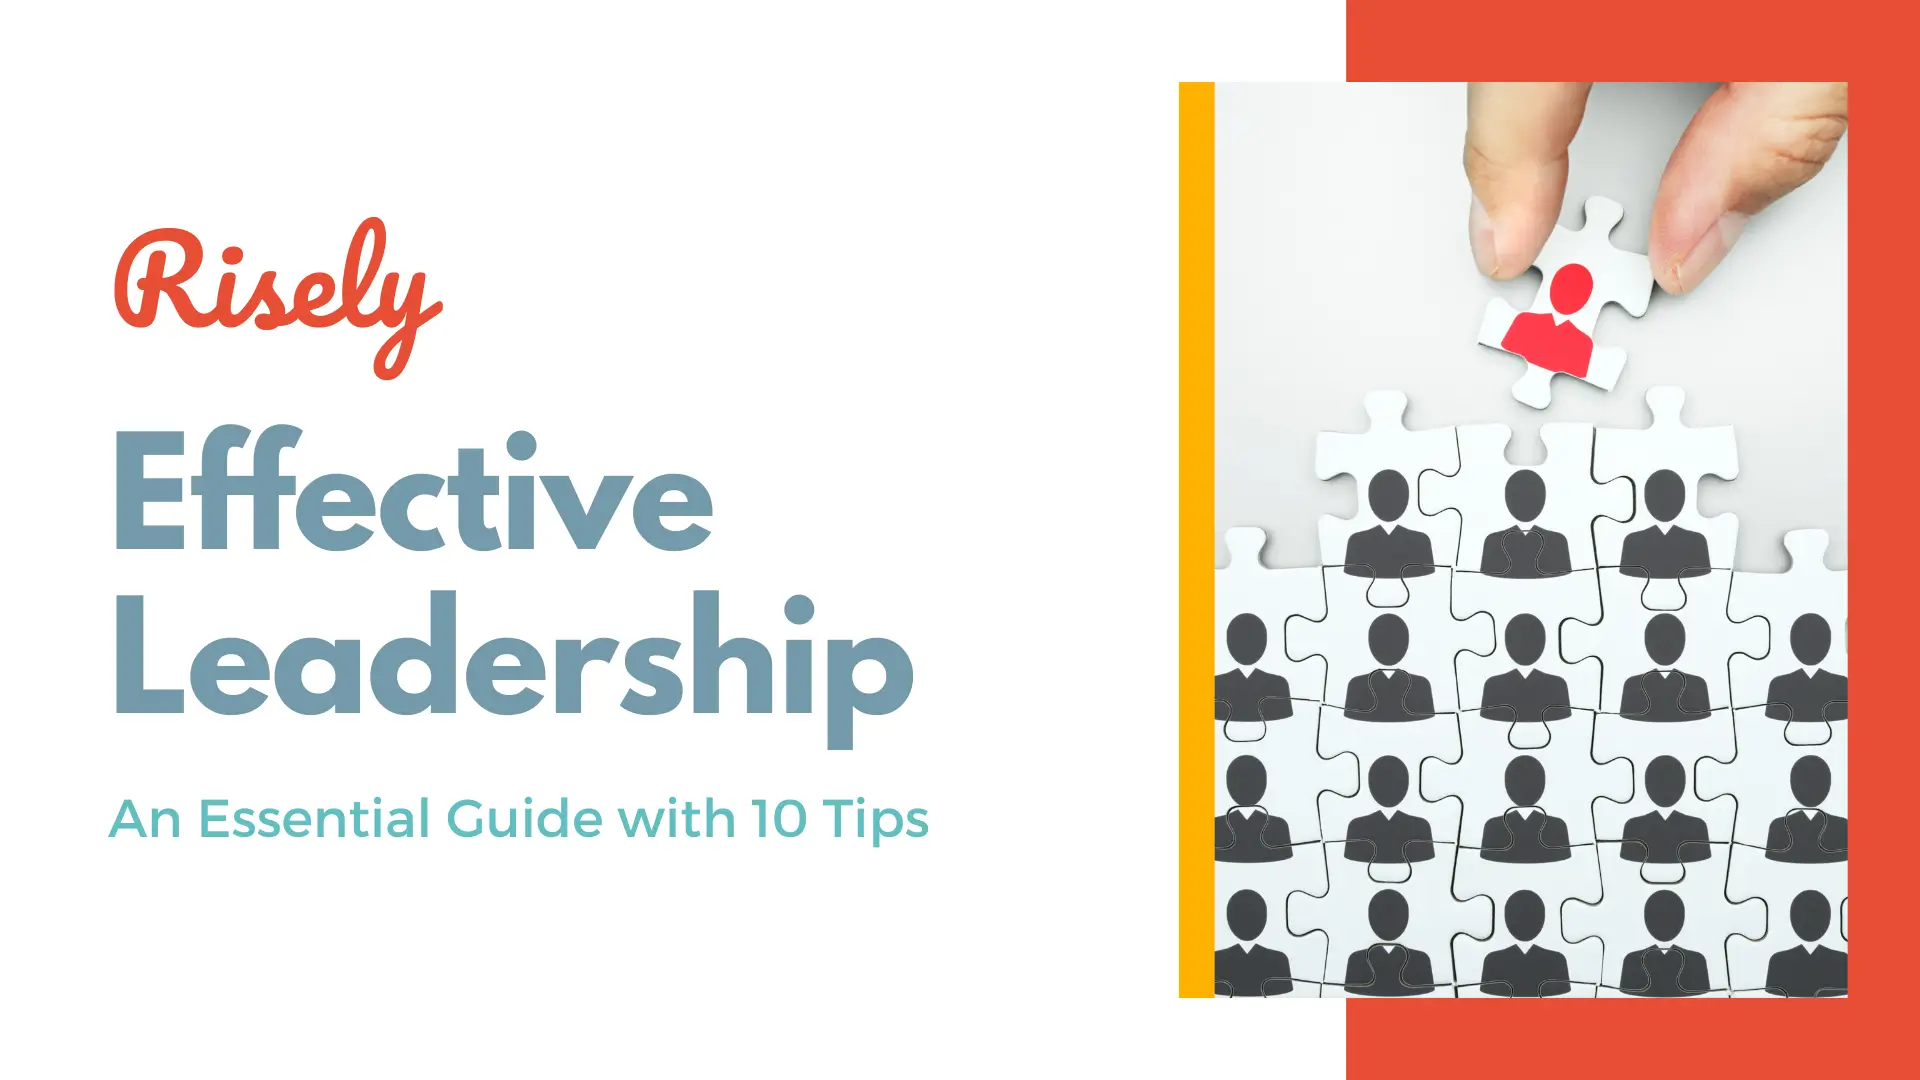 Effective Leadership: An Essential Guide with 10 Tips